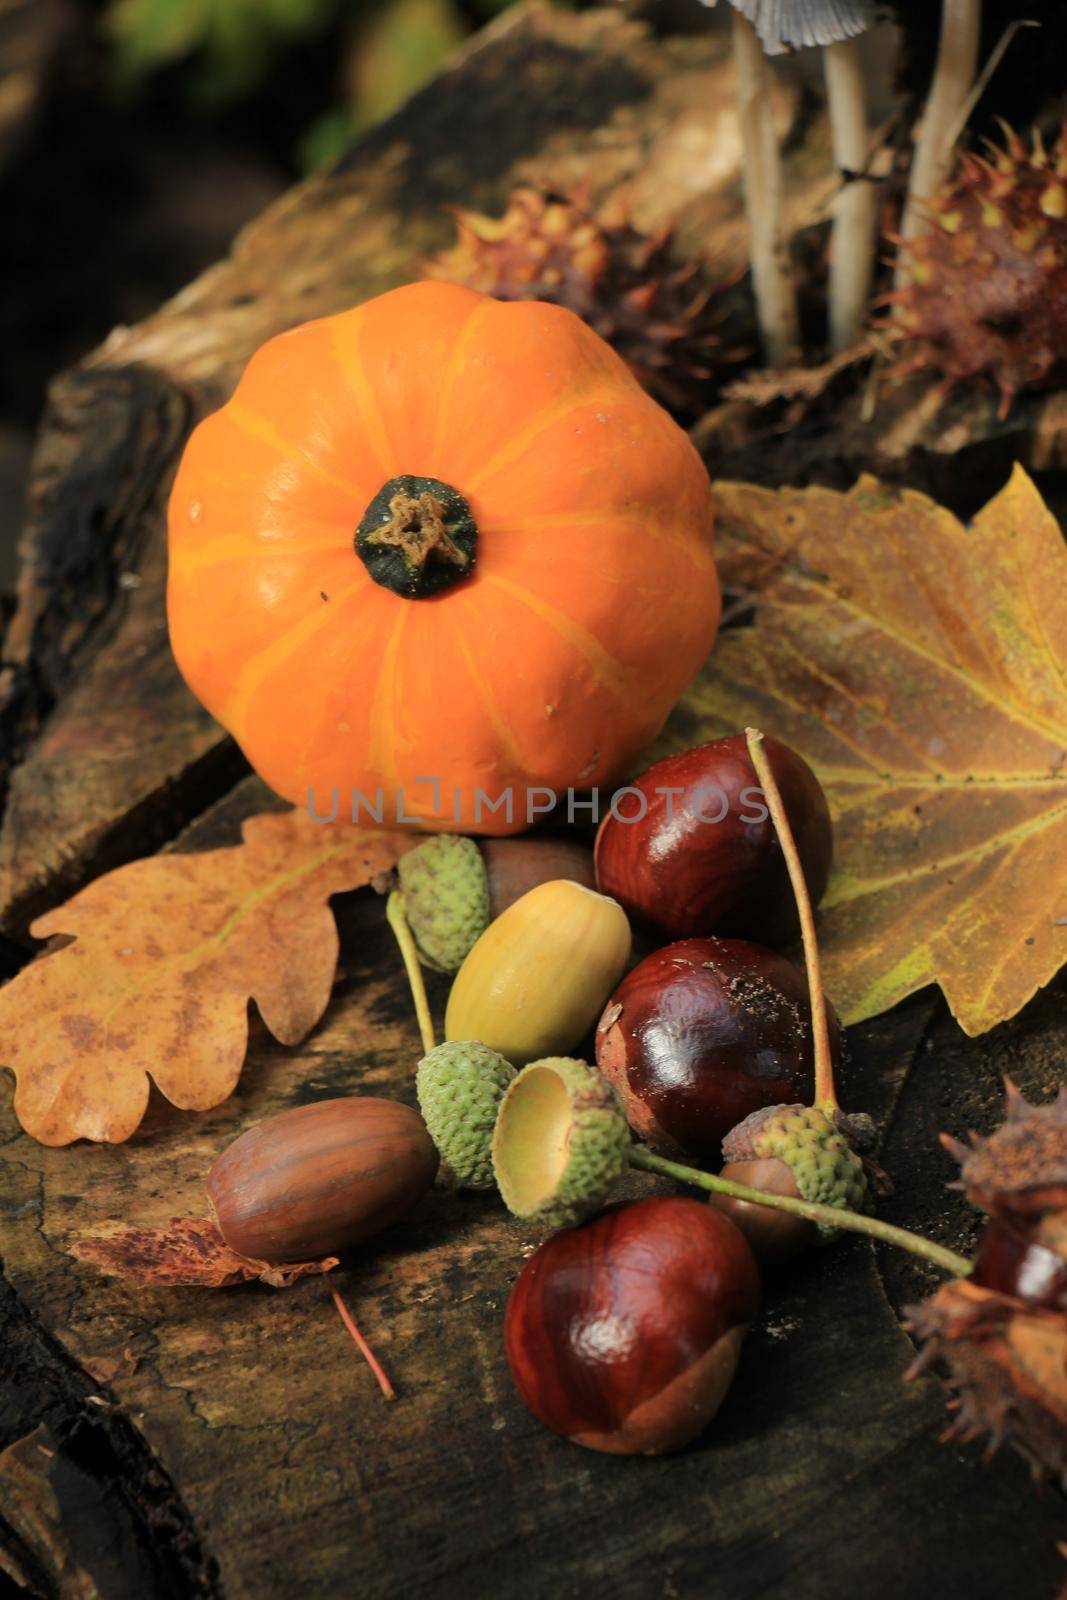 Autumn still life in a fall forest: mushrooms, chestnuts, pumpkins and leaves